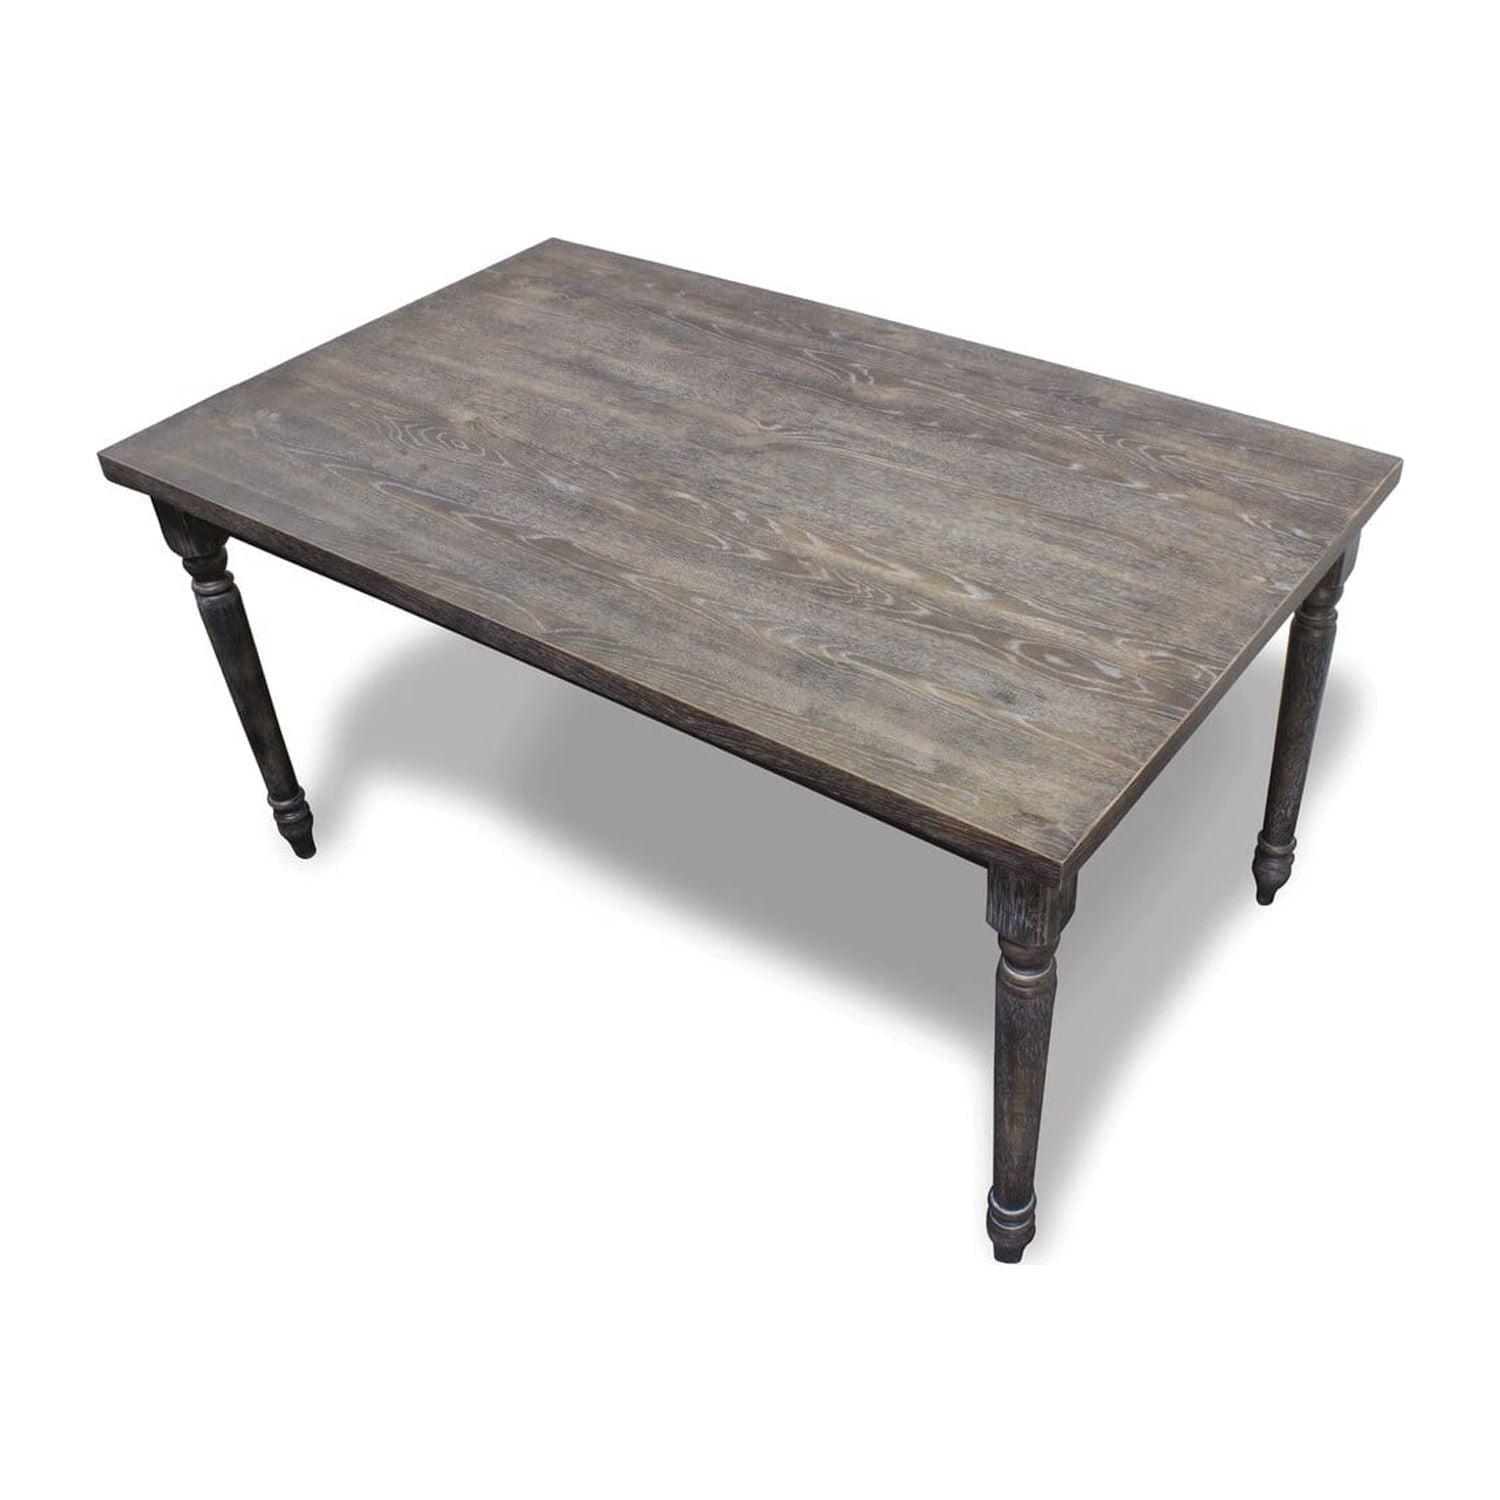 Transitional Reclaimed Wood Dining Table in Smoked Gray, Seats 6